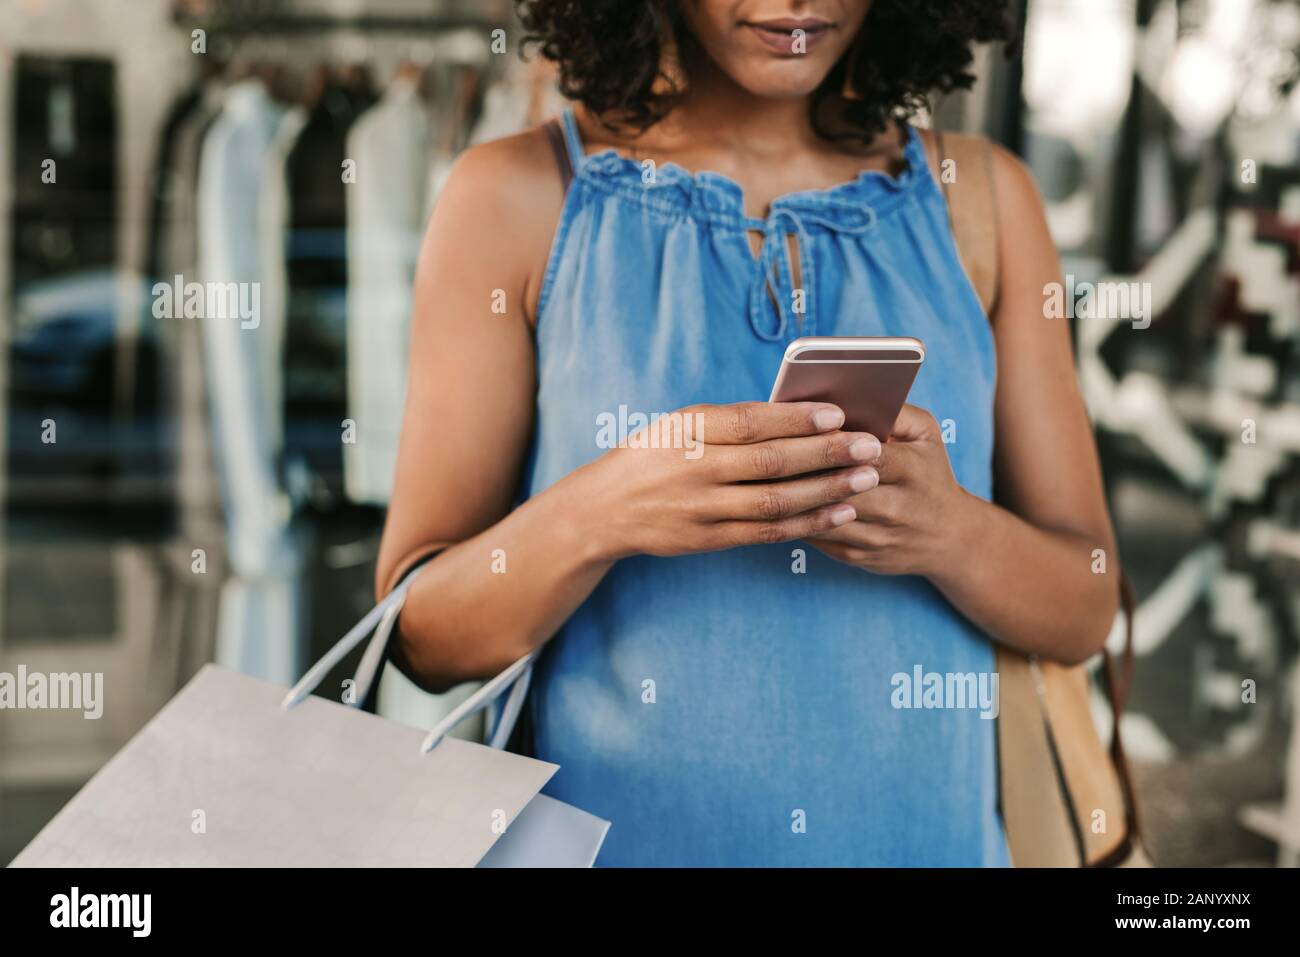 Woman using her cellphone while out shopping for clothing Stock Photo